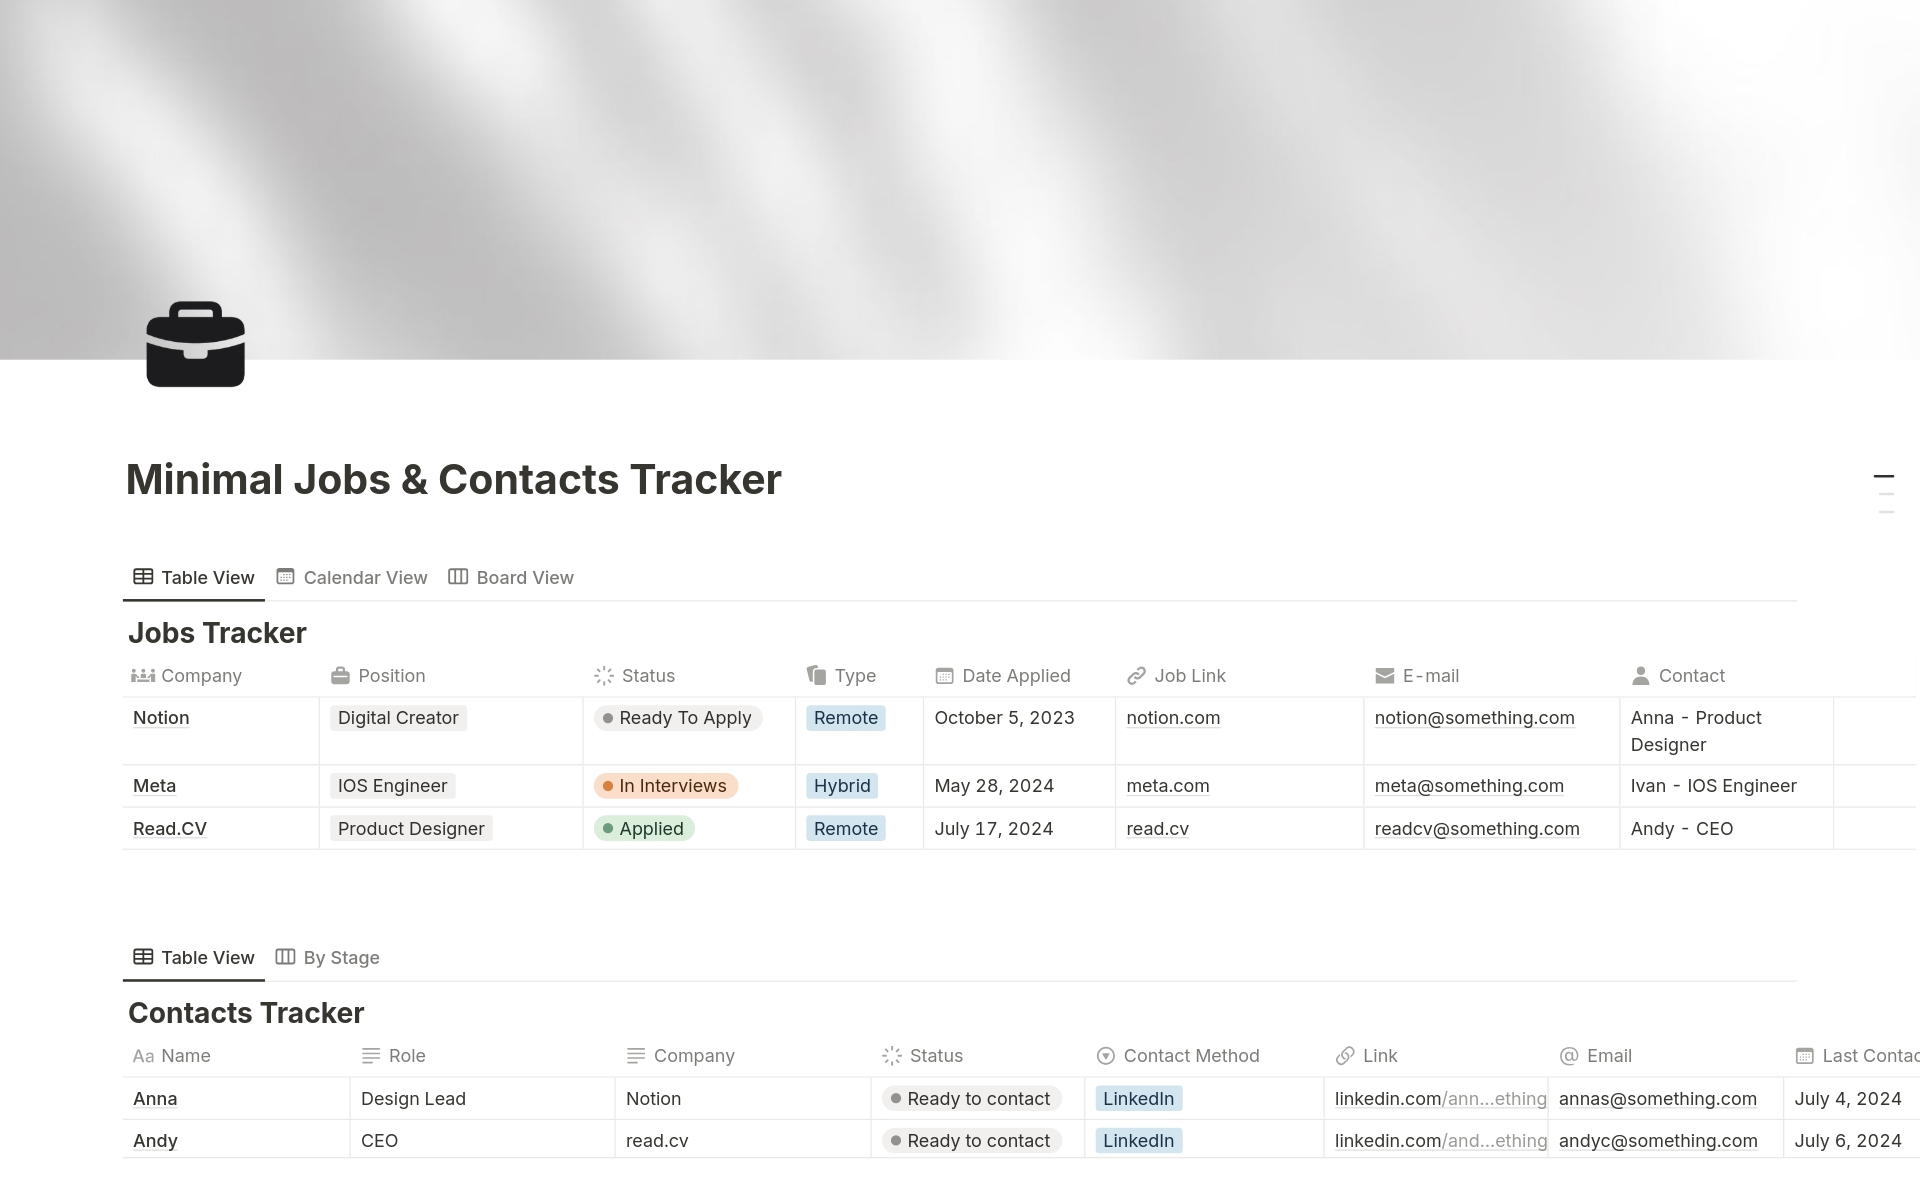 This template helps you easily keep track of all your job applications, contacts, and their statuses. It’s super simple and minimalist. I made this because I used to struggle with tracking where I applied, who I talked to, and what the next steps were.